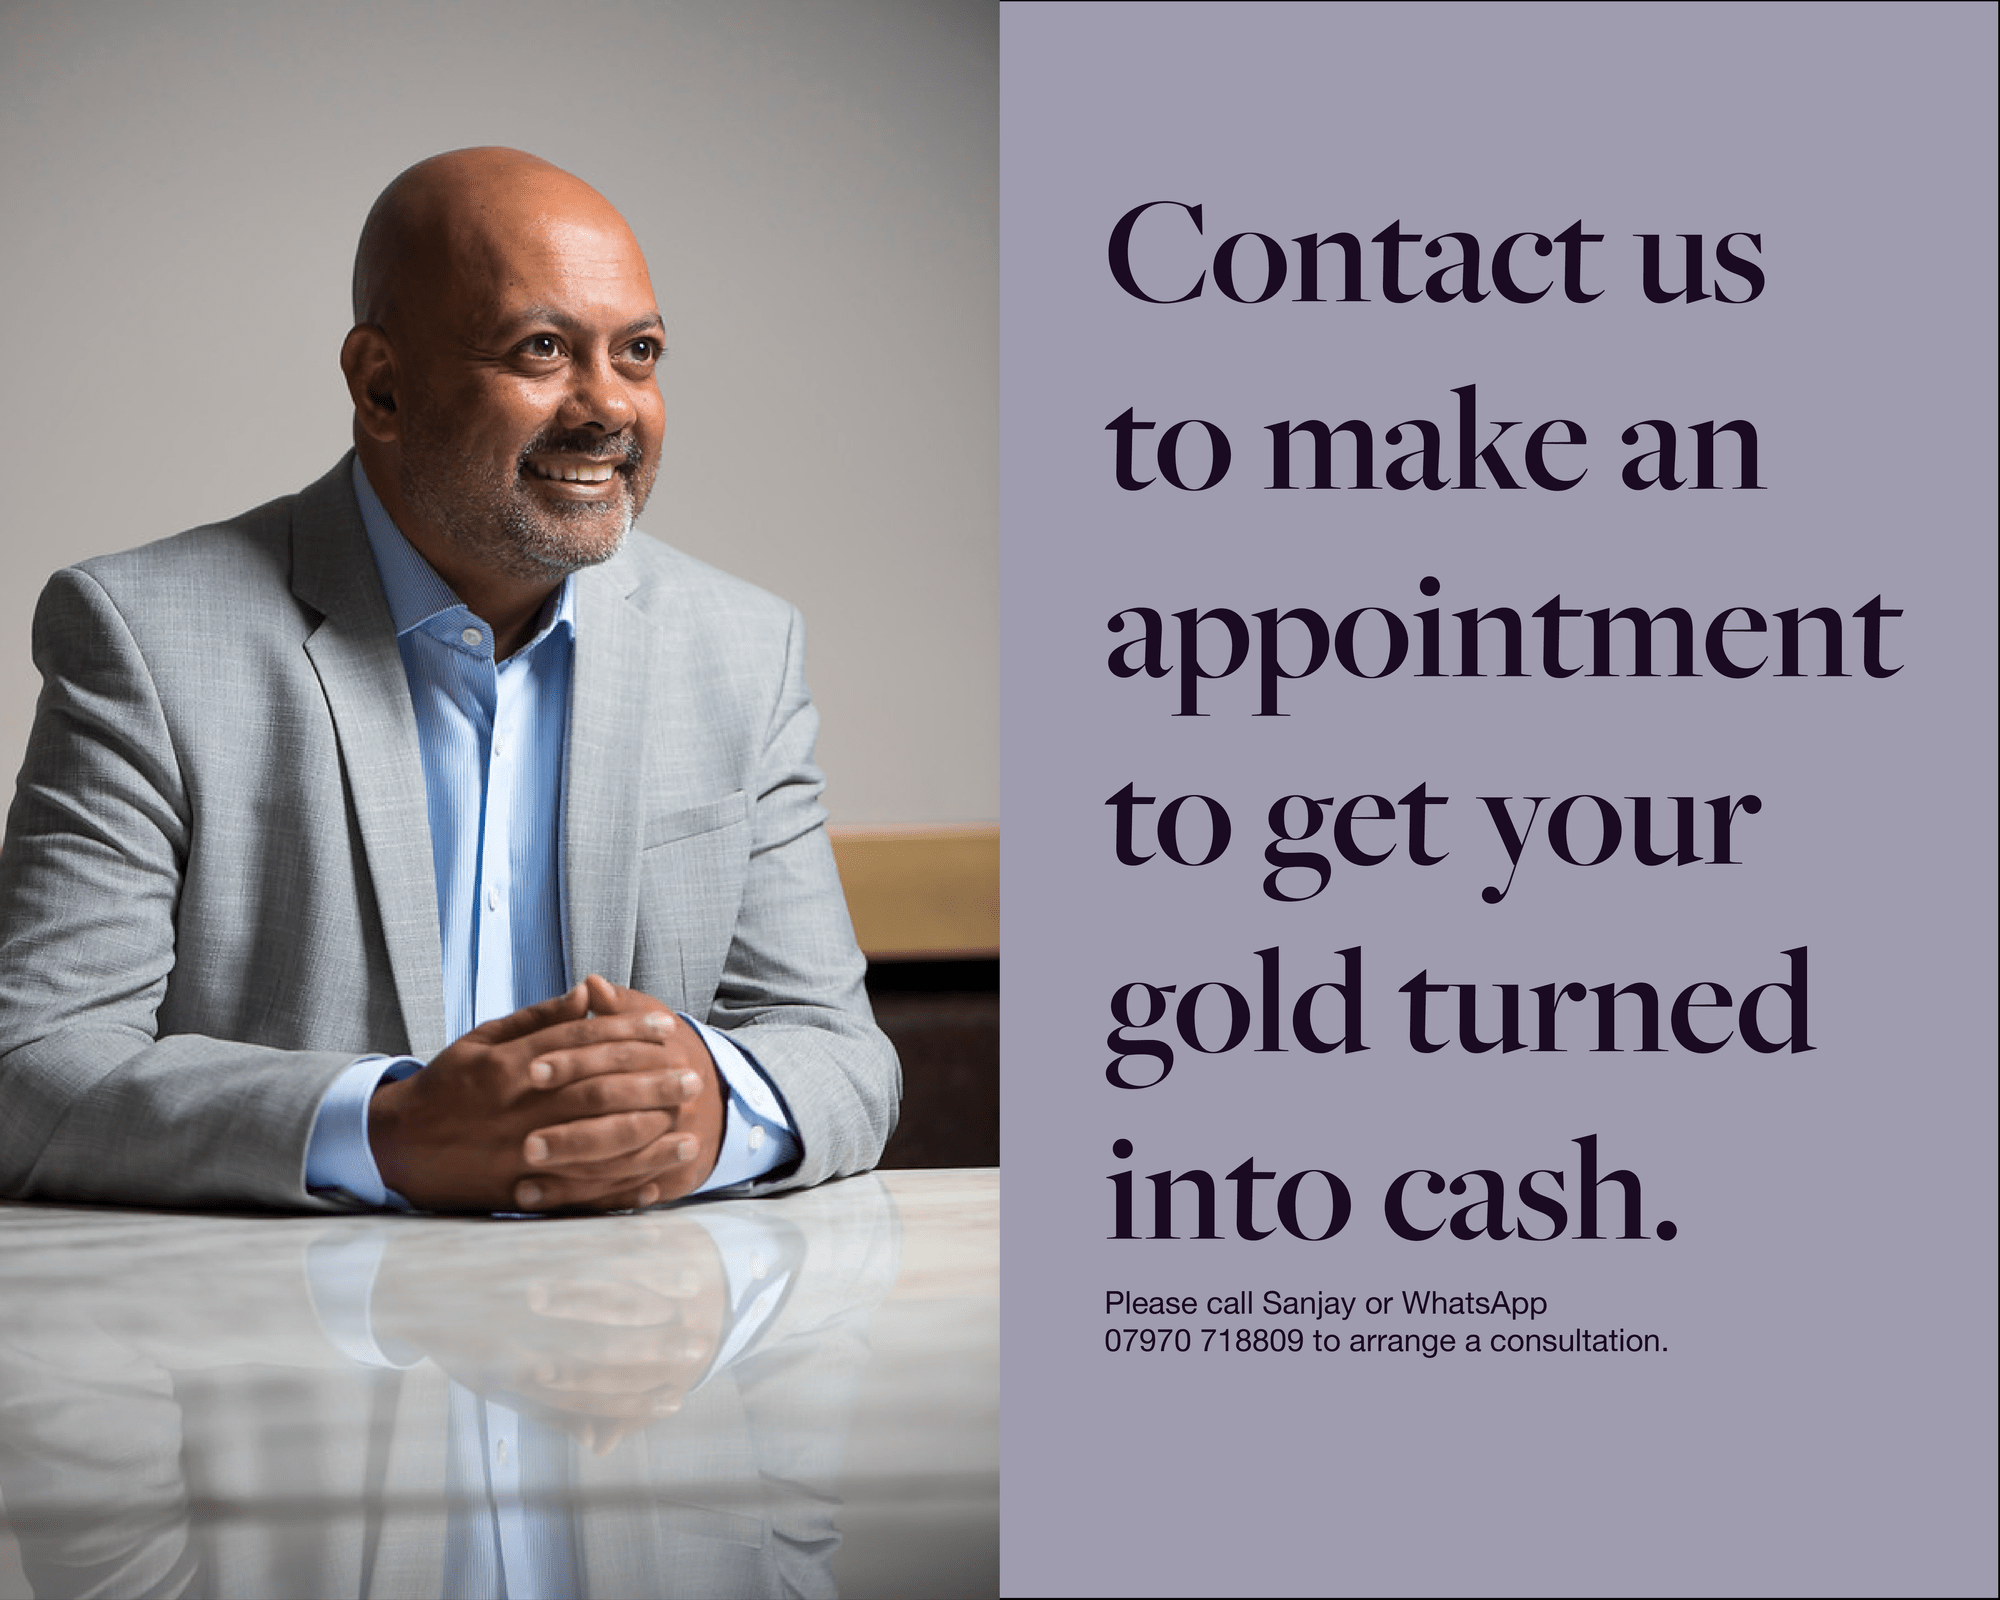 Sell your gold Mayfair Jewellers